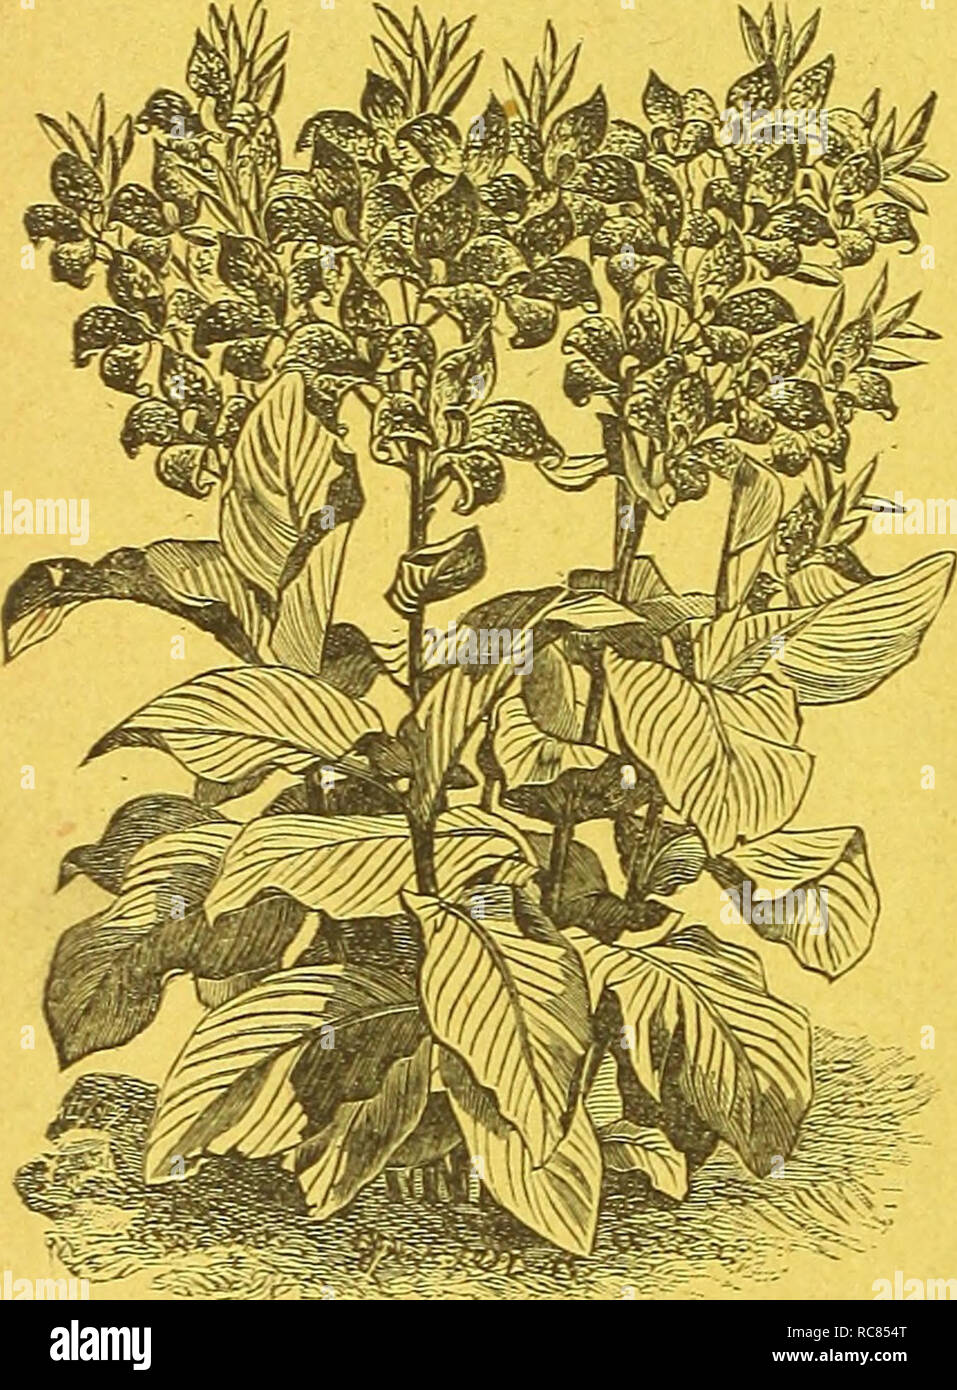 . Dreer's garden calendar : 1891. Seeds Catalogs; Nursery stock Catalogs; Gardening Catalogs; Flowers Seeds Catalogs; Fruit Seeds Catalogs. VI DREERS GARDEN CALENDAR. CAM A, MADAME CEOZY. The finest and most distinct variety yet introduced, with large flowers of dazzling scarlet, edged with golden yel- low. The plant is a vigorous grower, of dwarf habit, and remarkably free-flowering. No. 5406. Per pkt., 25 cts. OANNA, EMILE LE OLERO. This is a very beautiful and extremely effective variety, having light green foliage, and golden yellow orchid-like flowers, striped and spotted with crimson. No Stock Photo